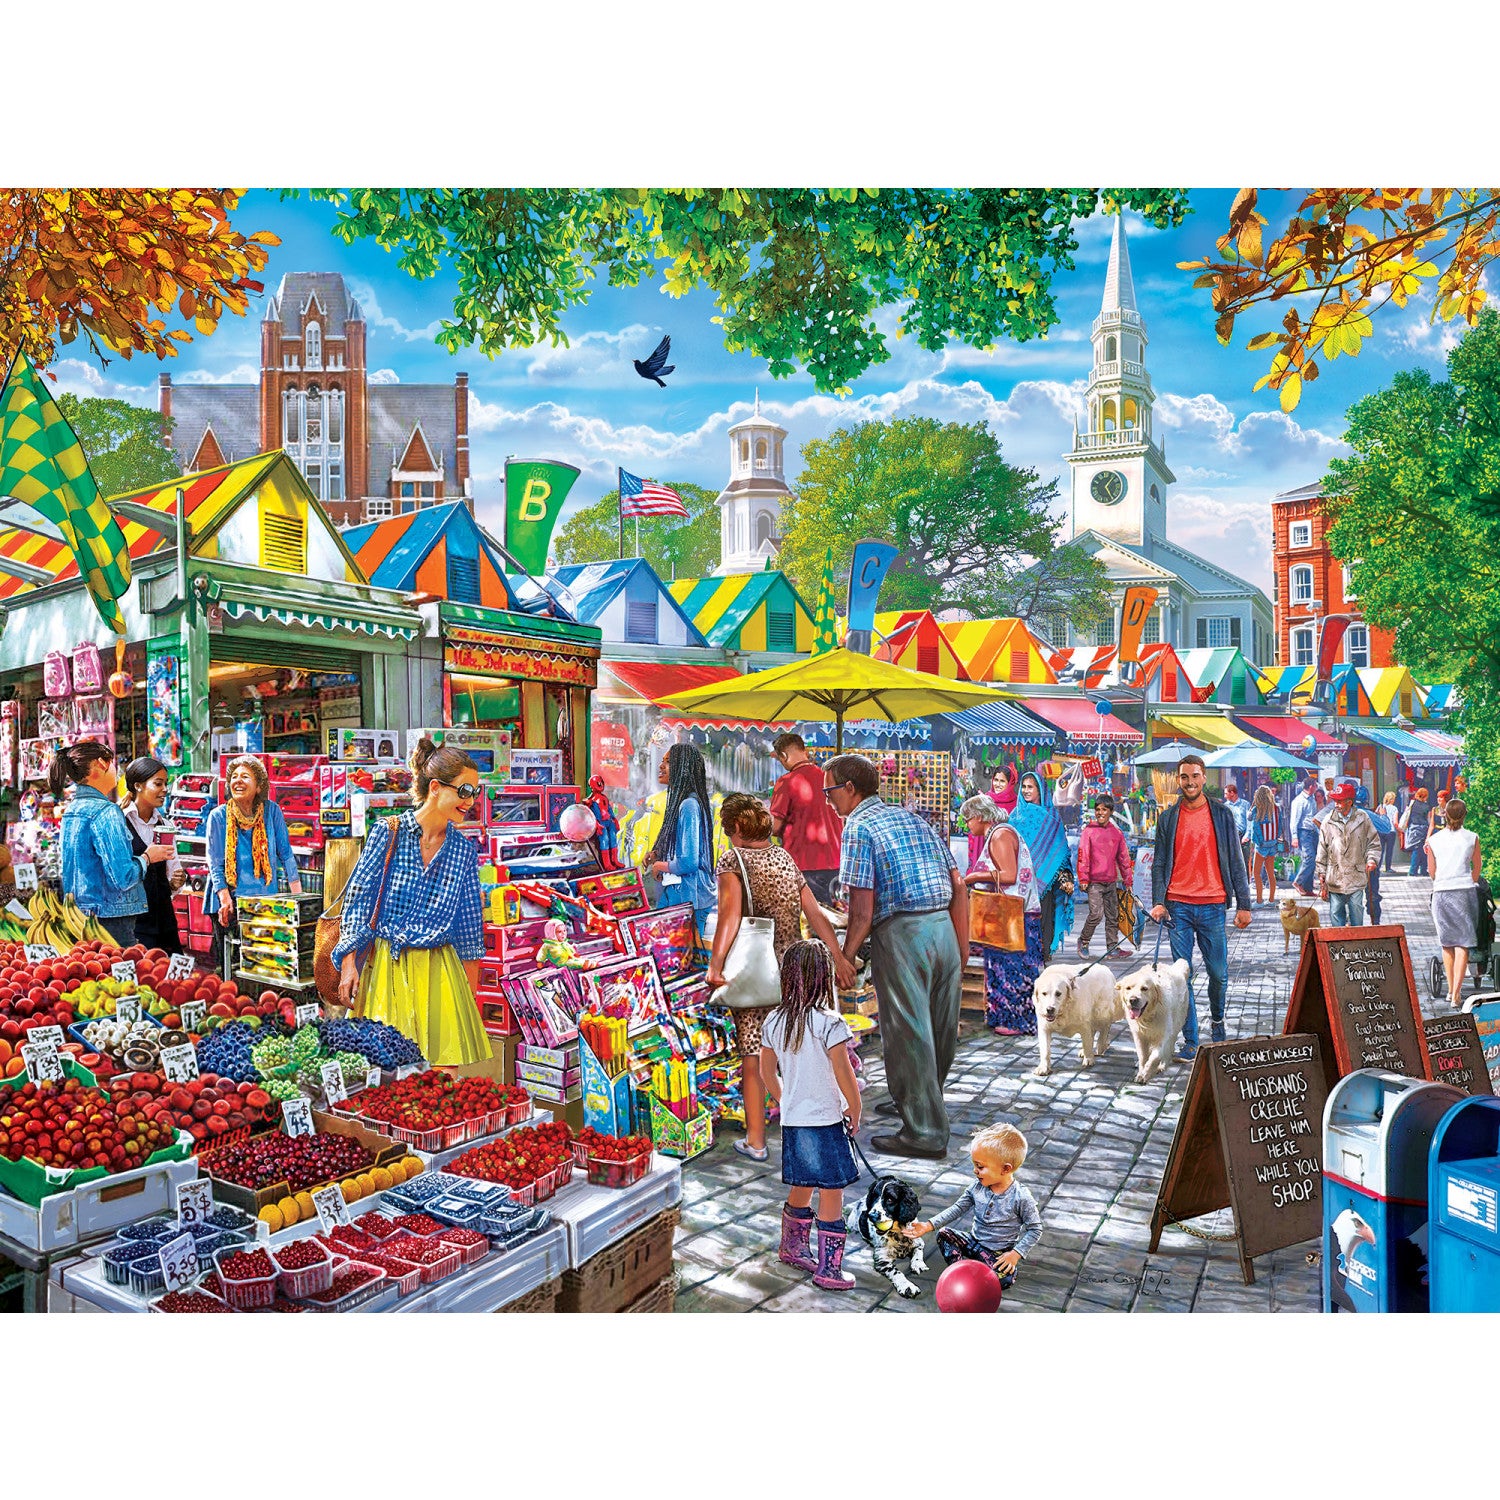 Farmer's Market - Market Day Afternoon 750 Piece Puzzle